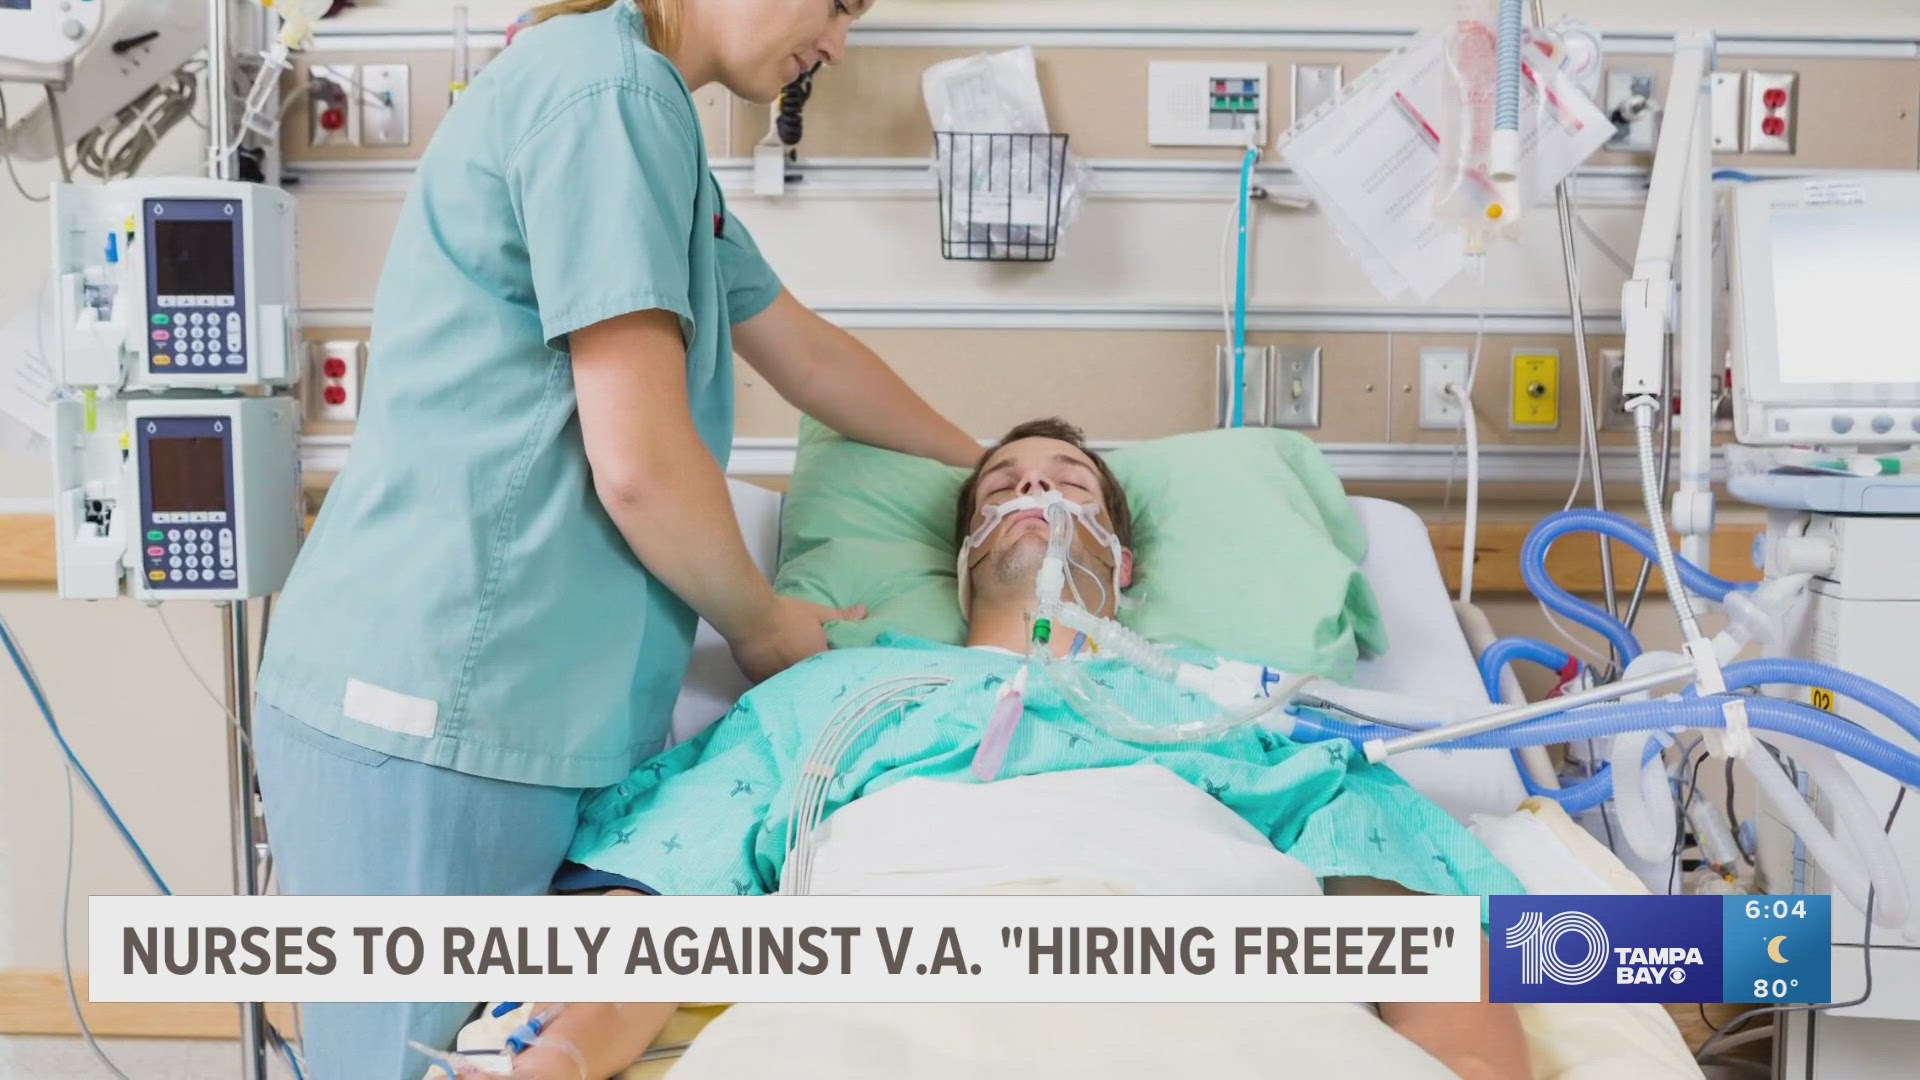 Nurses say amid staffing shortages plaguing veterans hospitals already, this so-called "hiring freeze" is making those shortages worse.